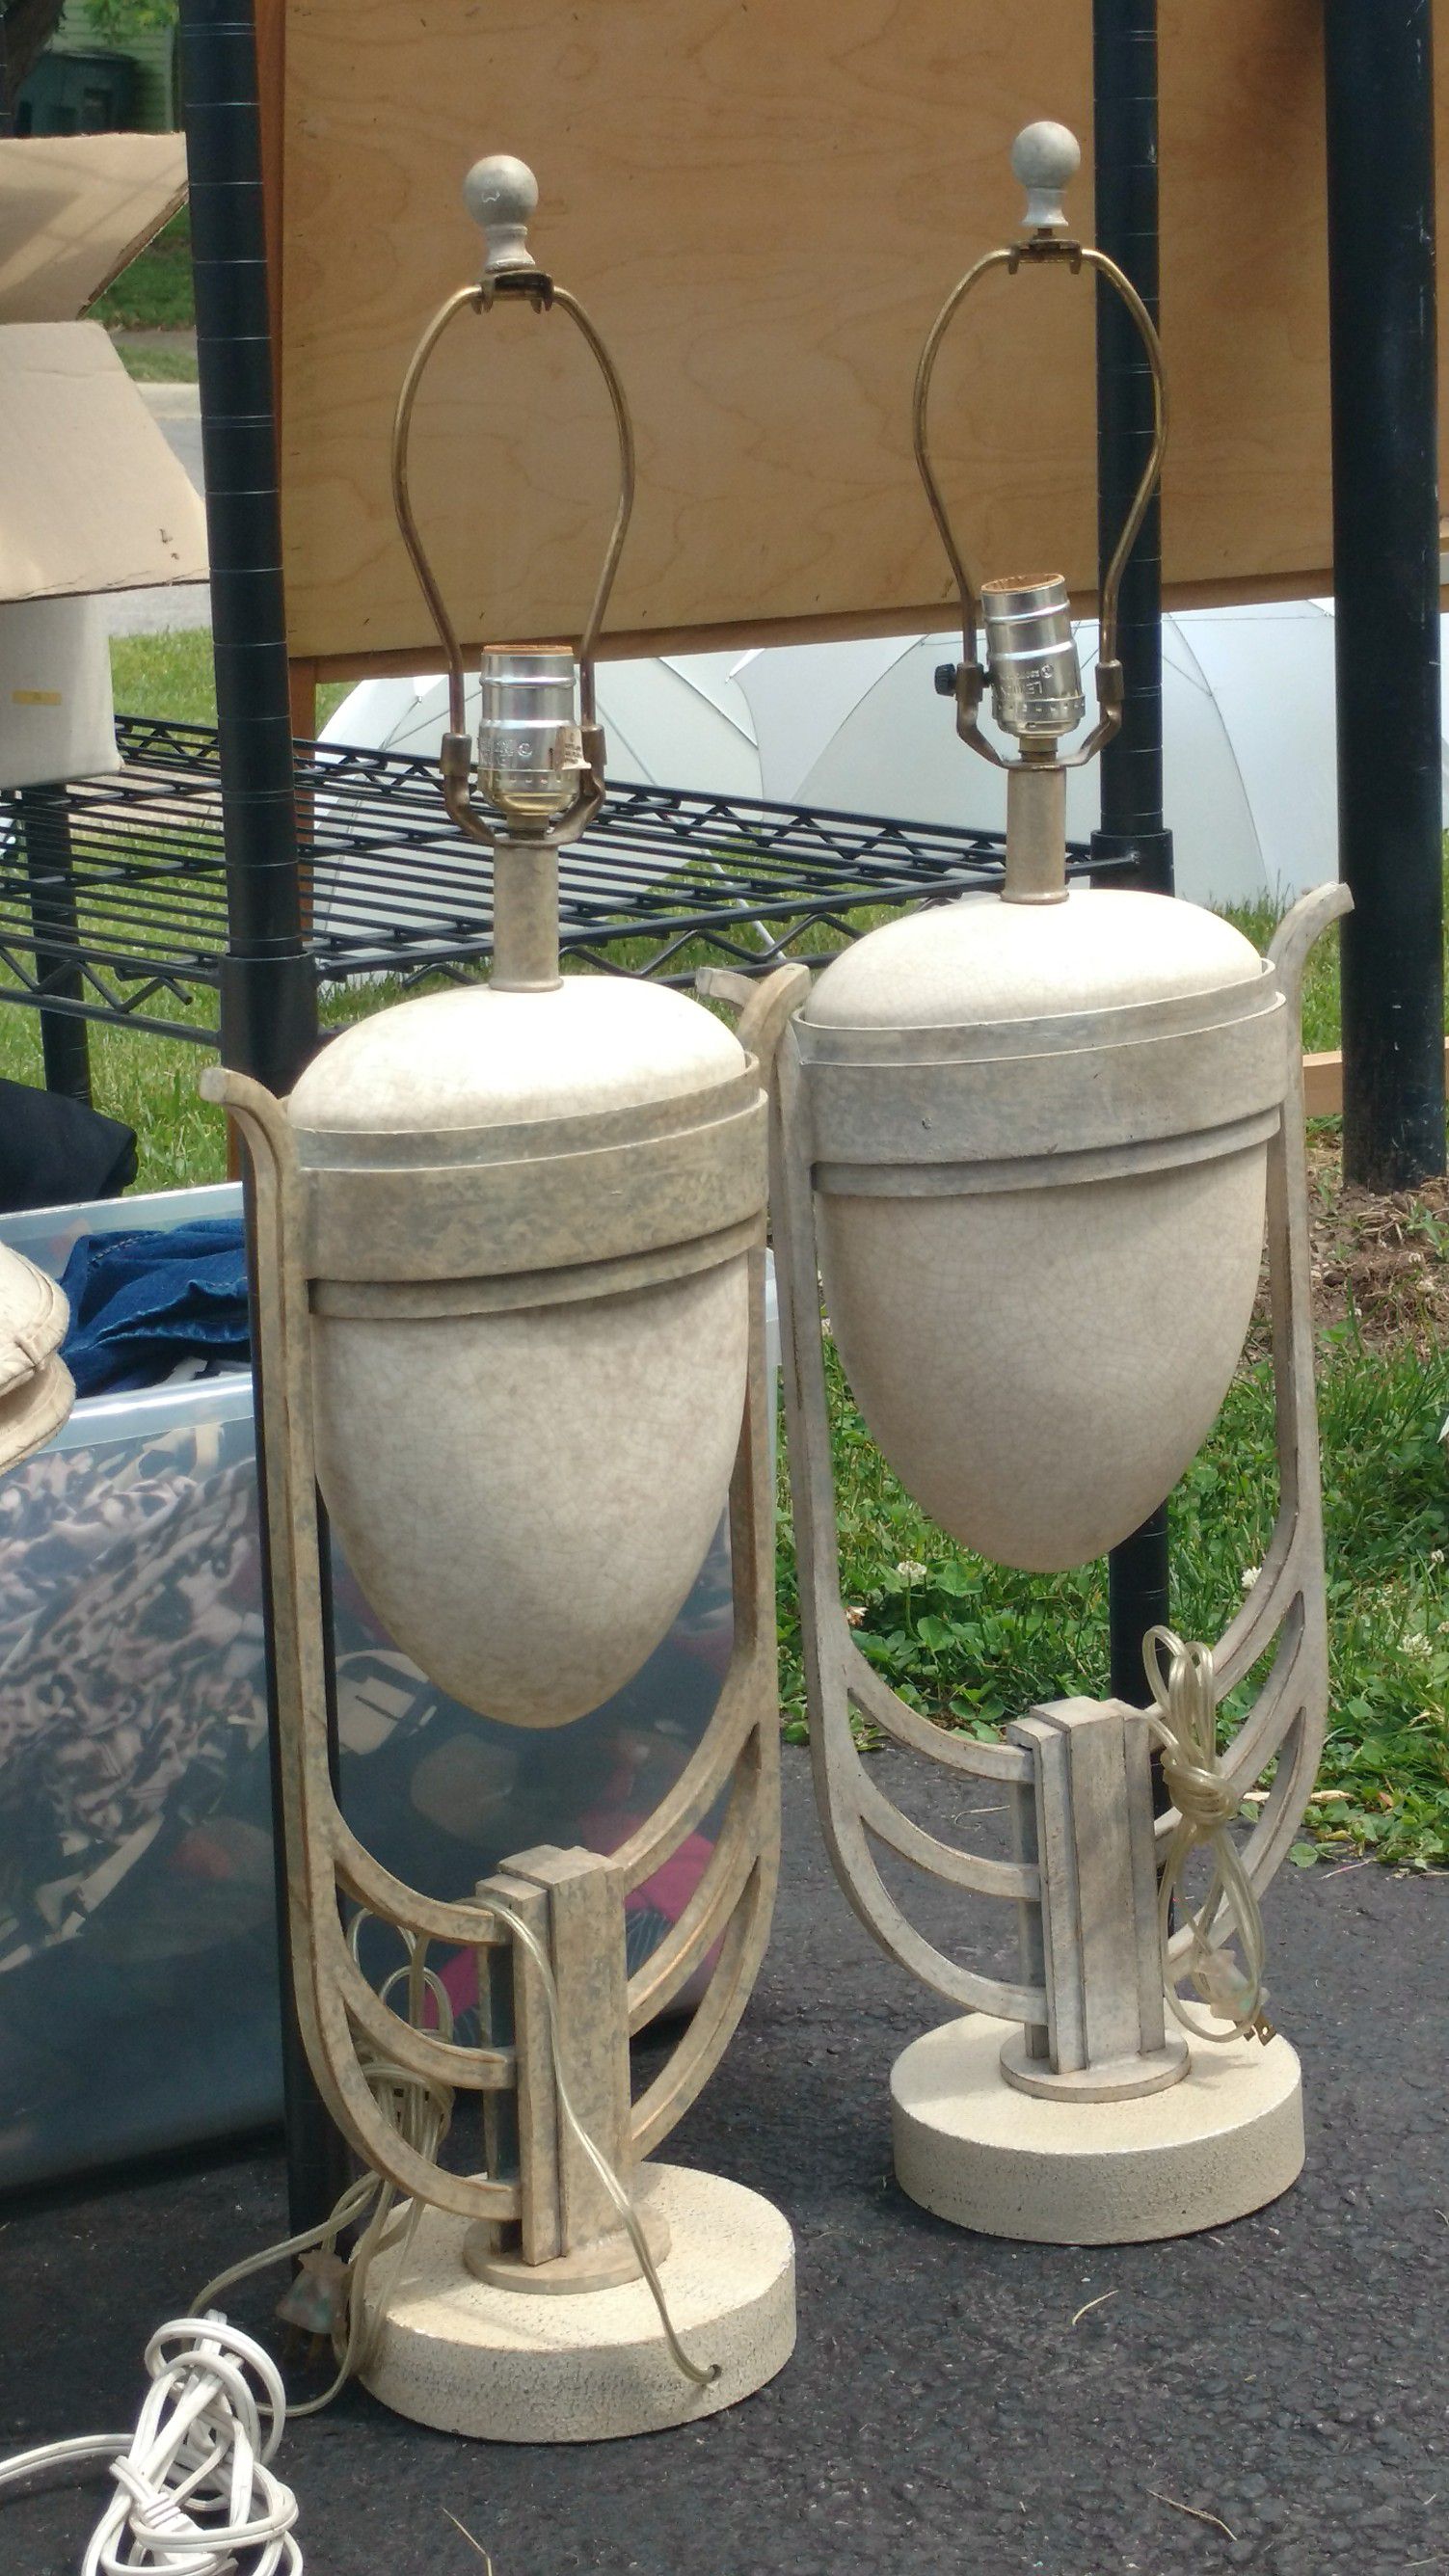 Set of 2 trophy Style Iron and stone lamps